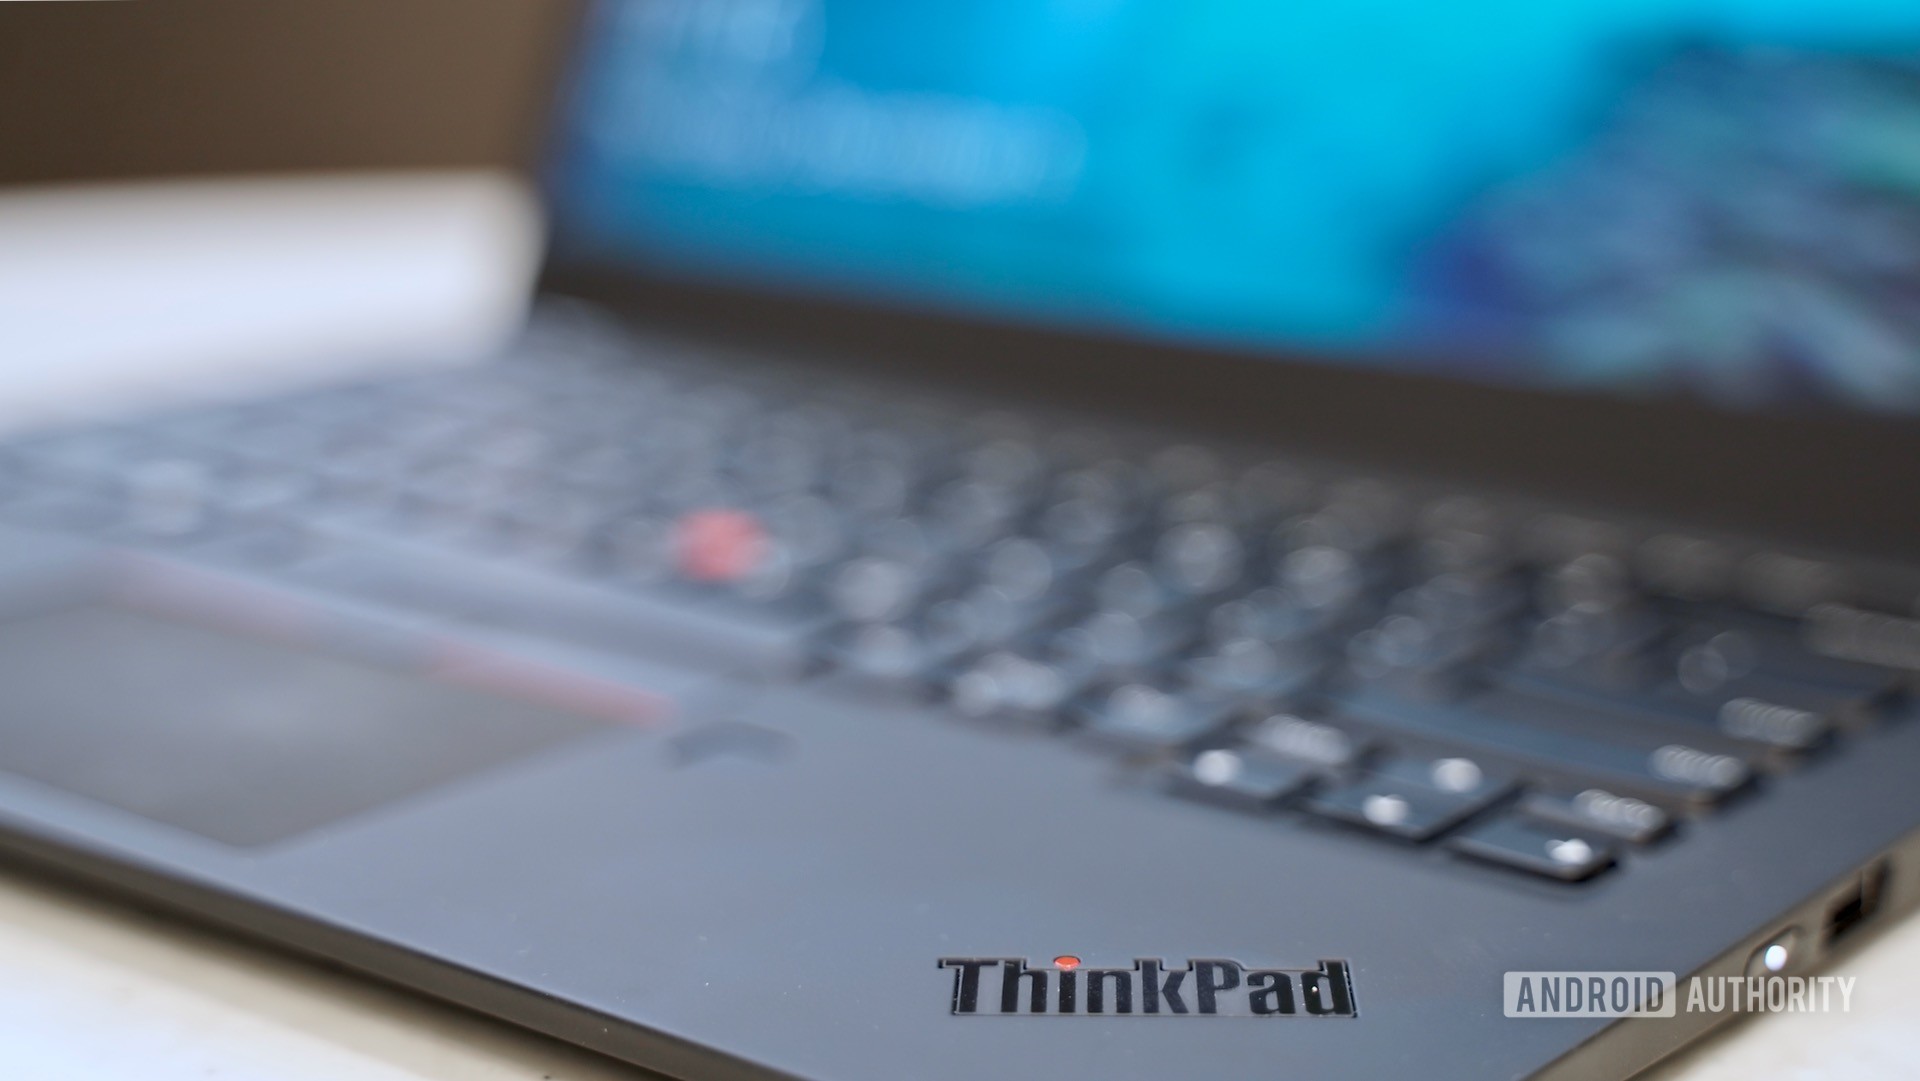 Lenovo ThinkPad X1 Carbon review keyboard right profile